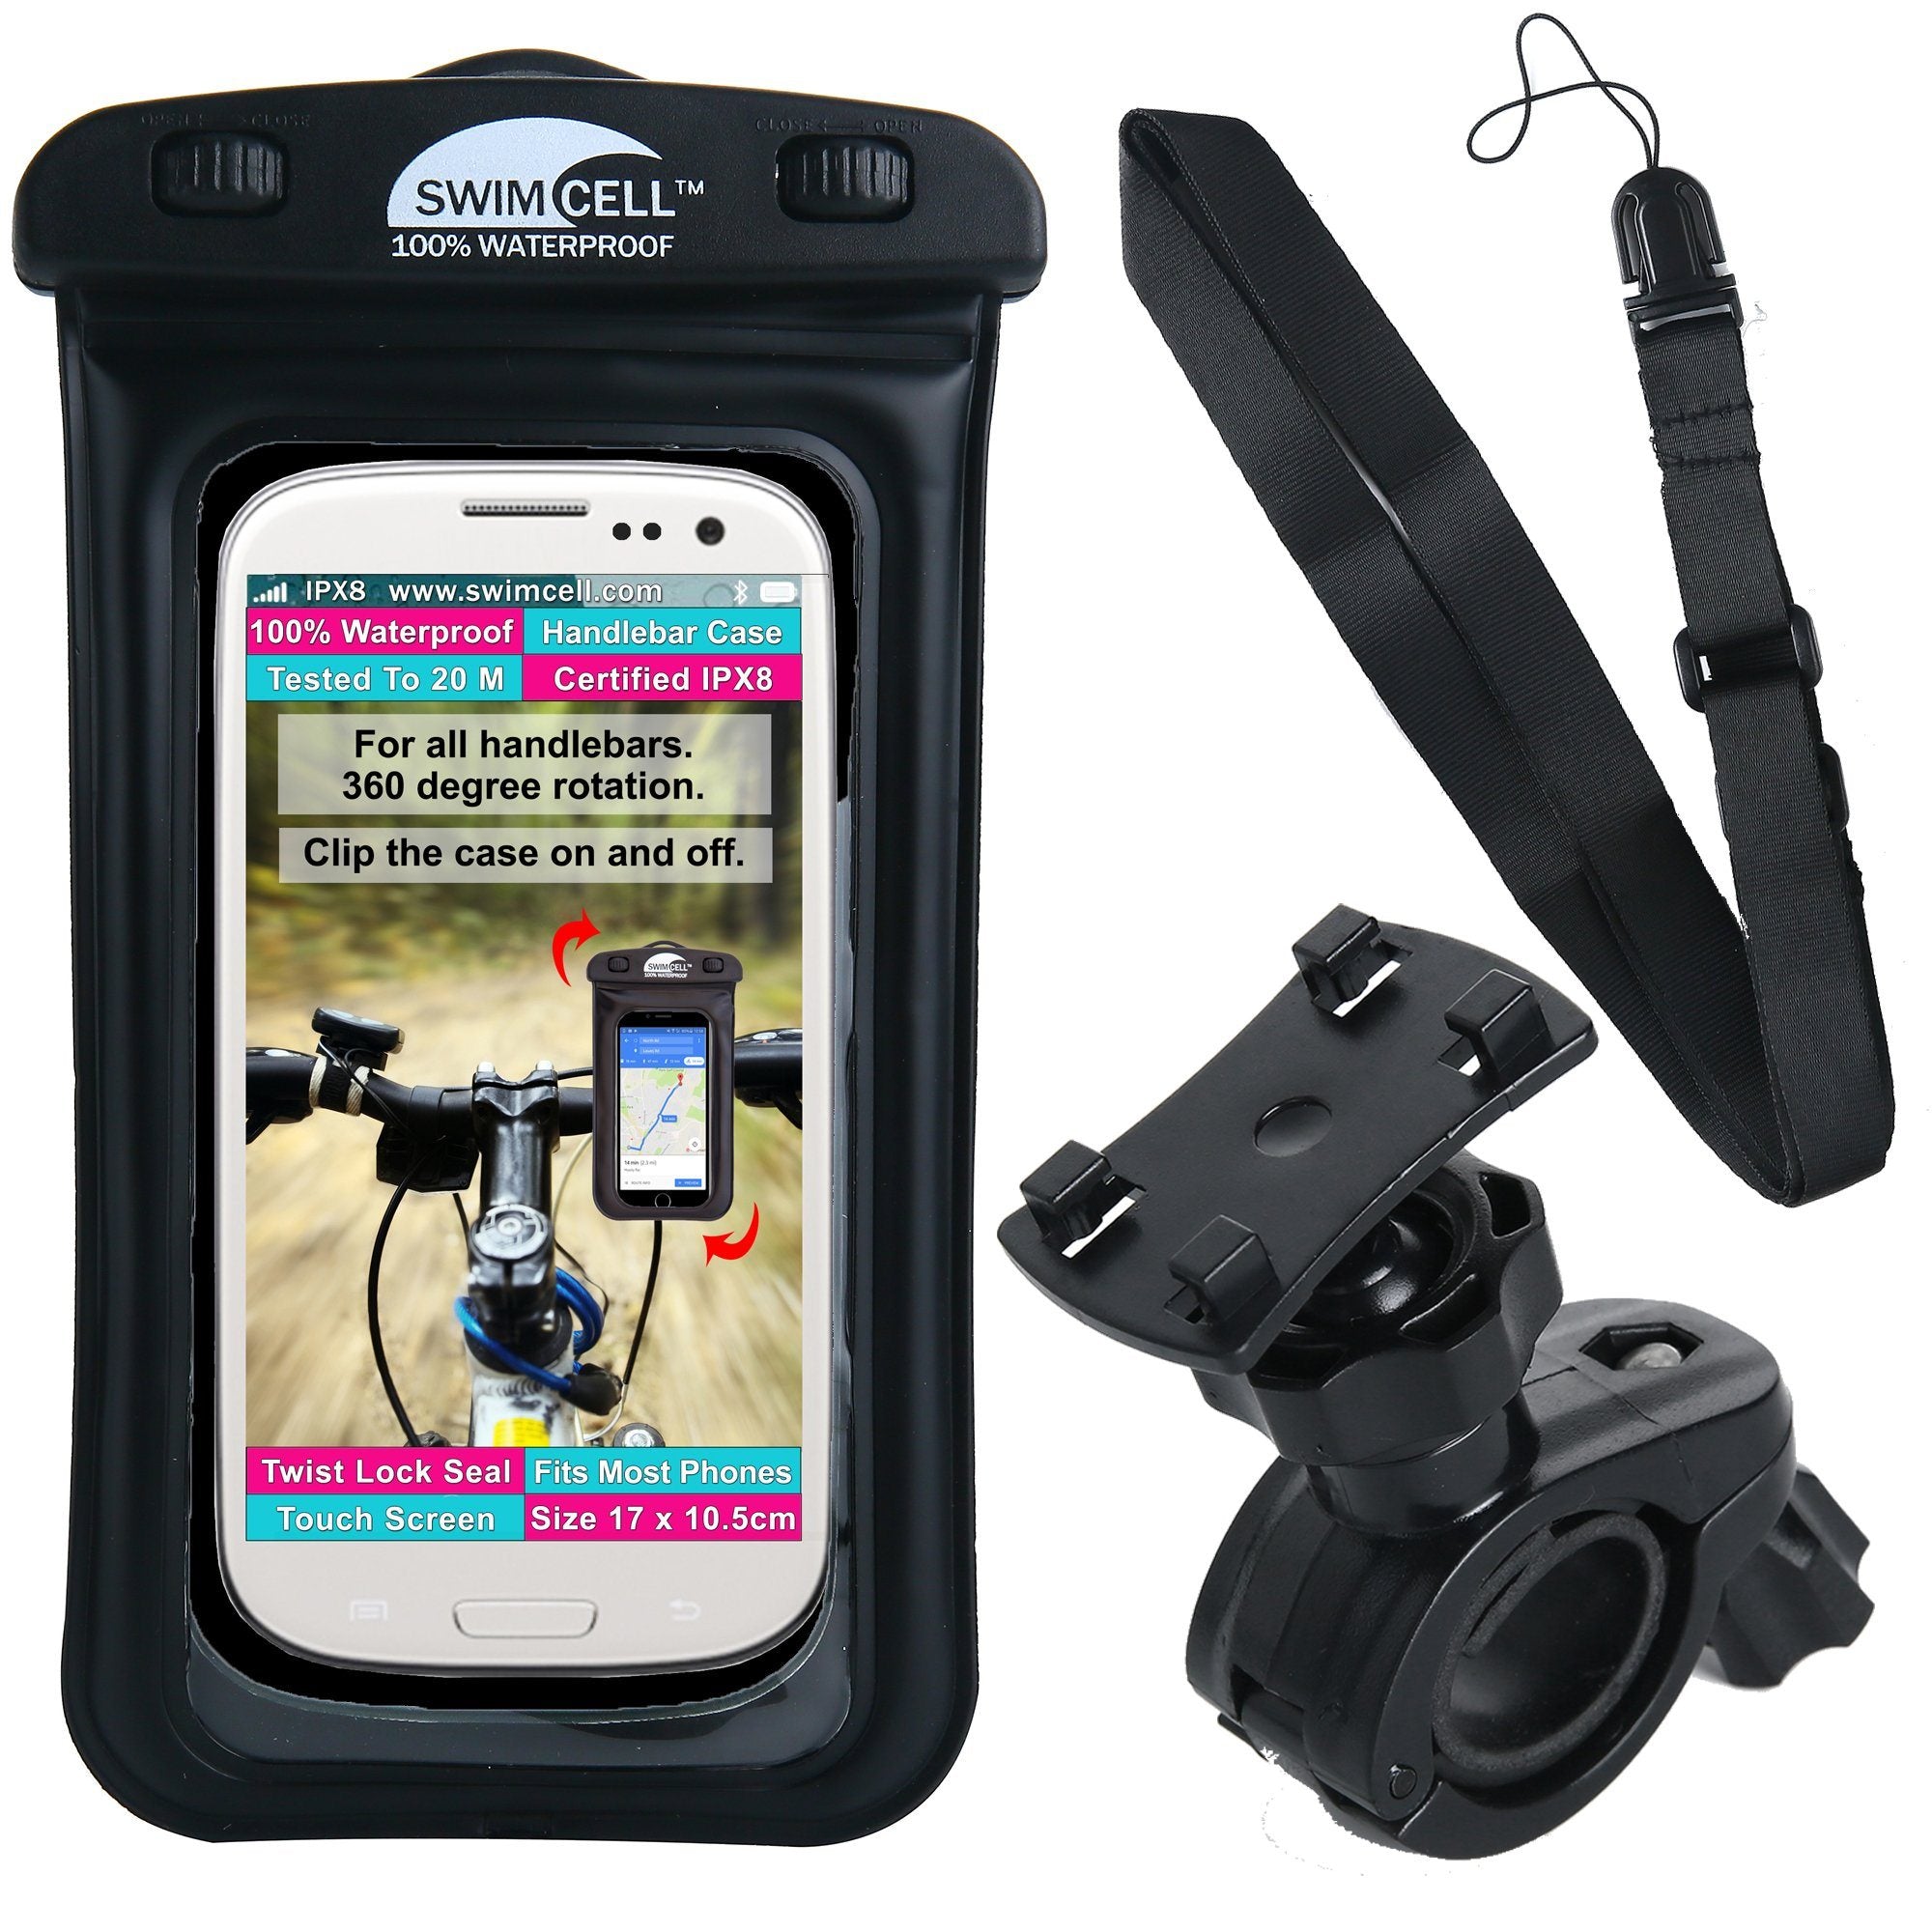 Waterproof Case For Phone With Bicycle Handlebar Mount Just Launched!